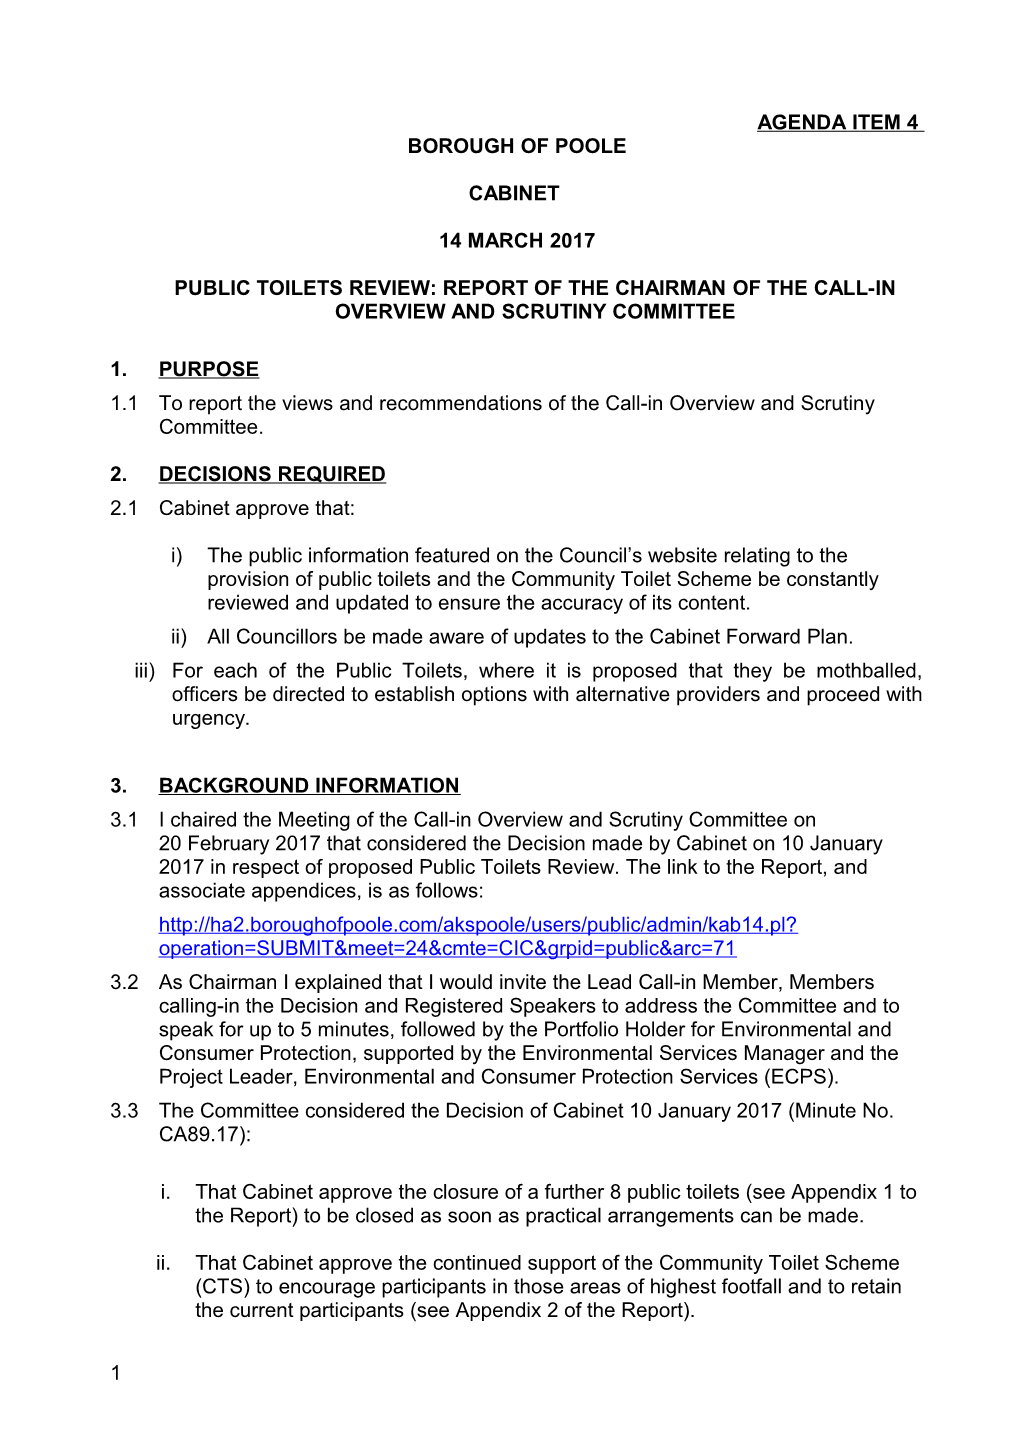 PUBLIC TOILETS REVIEW: Report of the CHAIRMAN of the CALL-IN OVERVIEW and SCRUTINY COMMITTEE